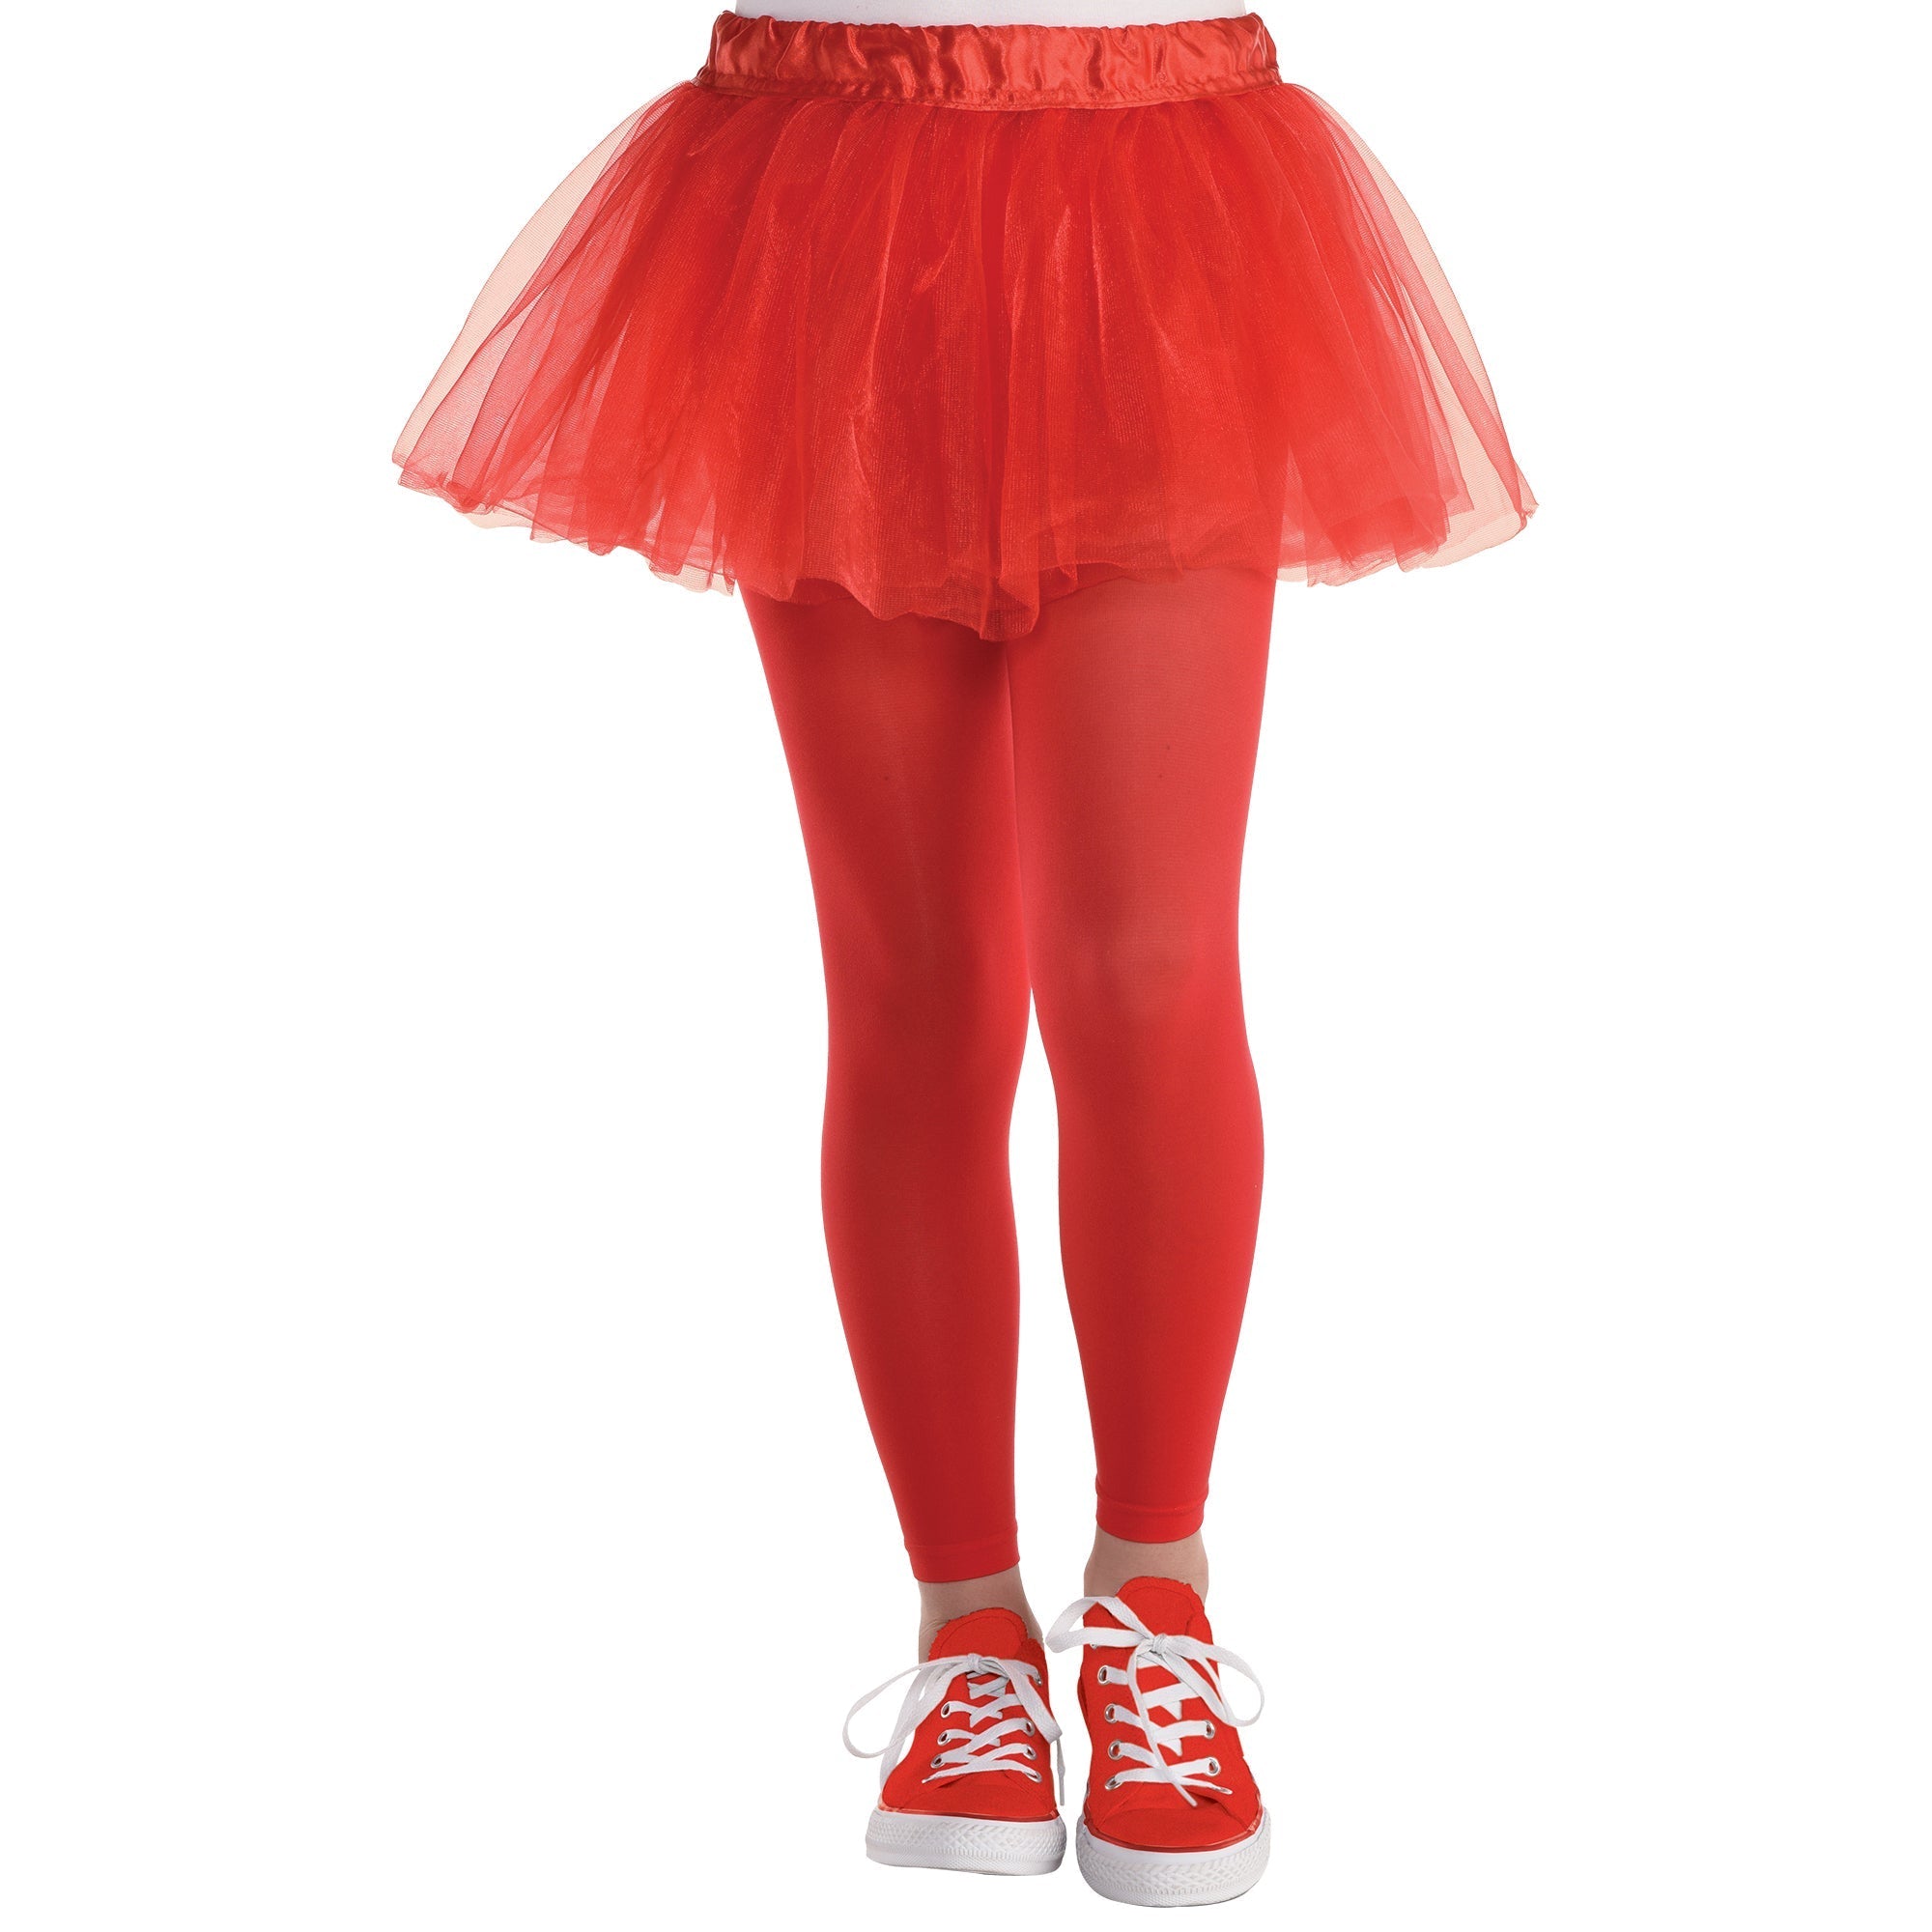 Red Footless Tights for Kids